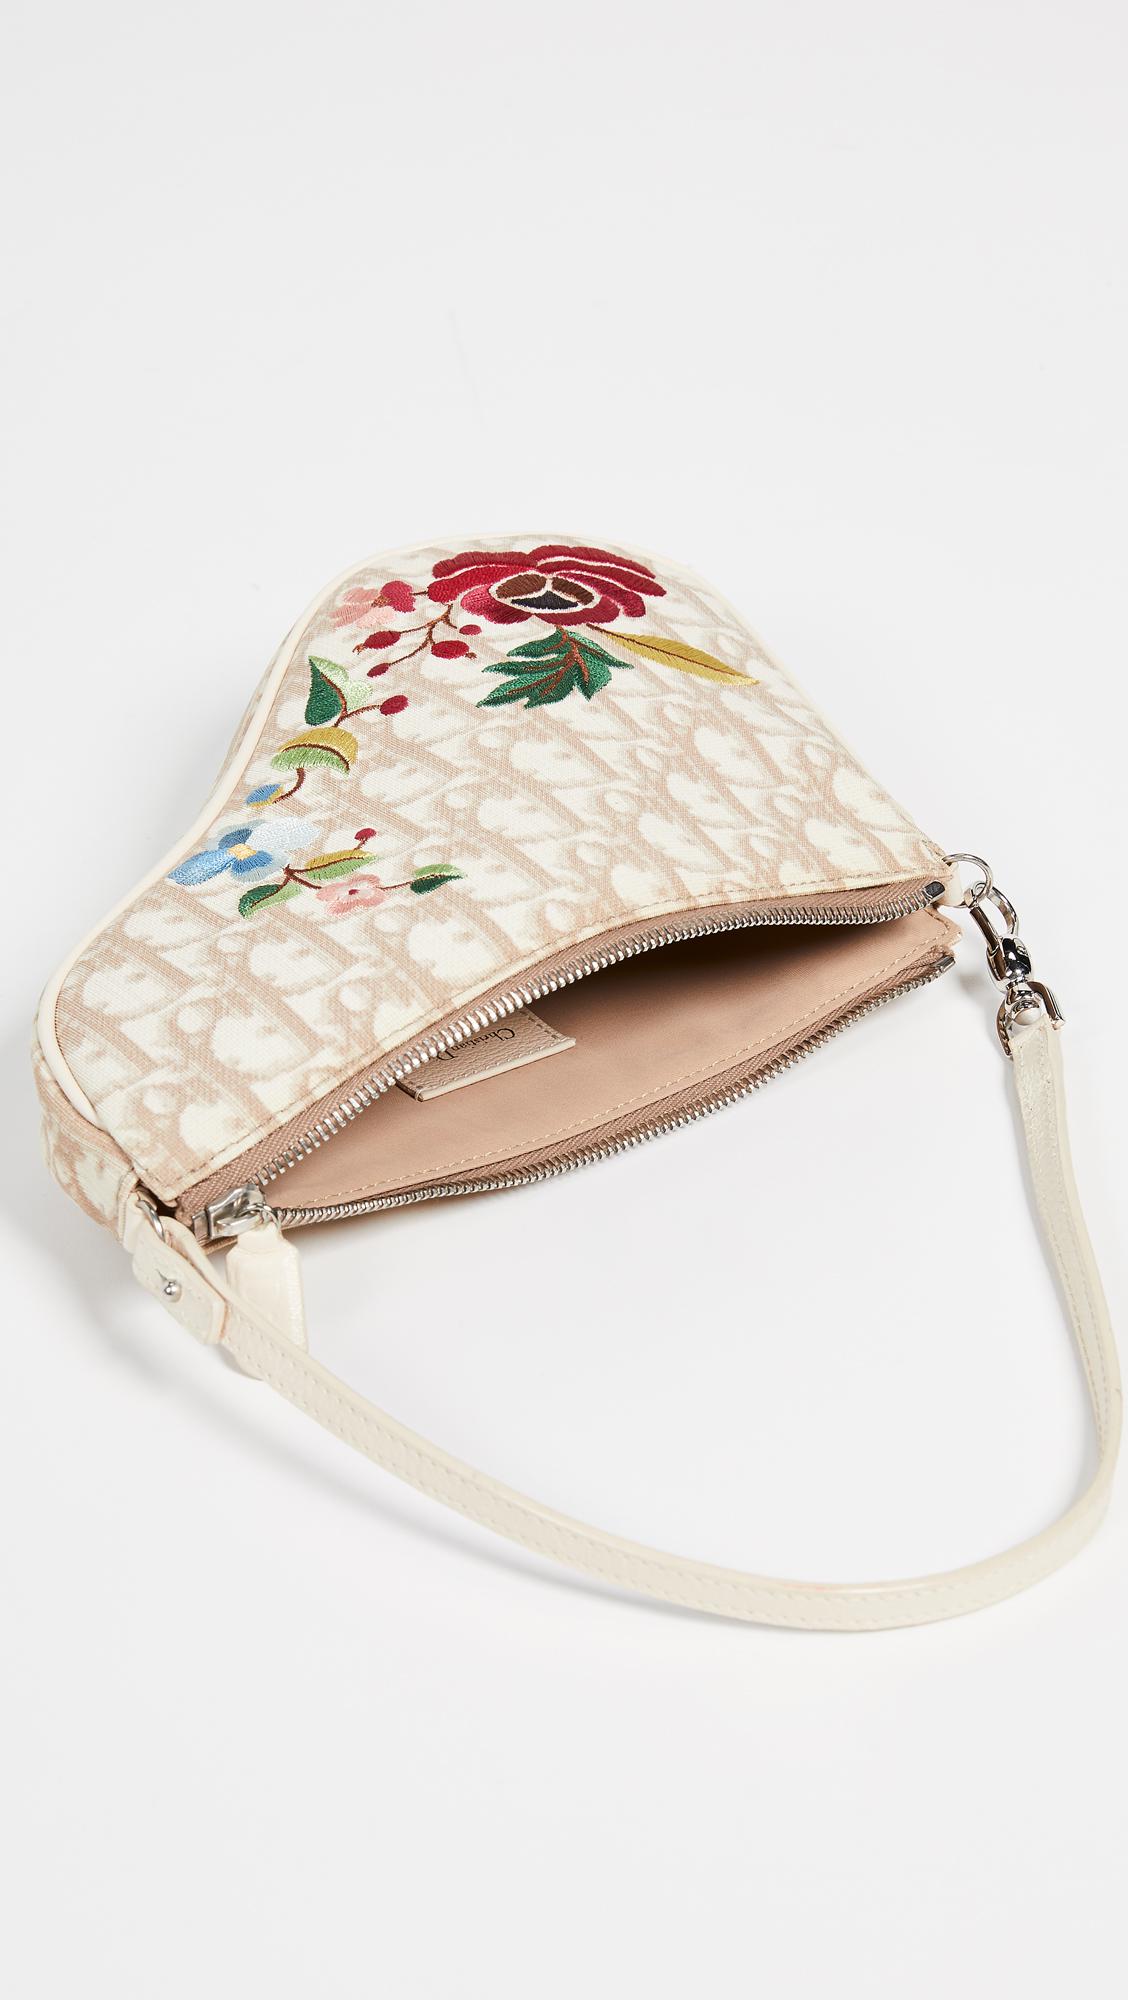 What Goes Around Comes Around Dior Flower Mini Saddle Bag in